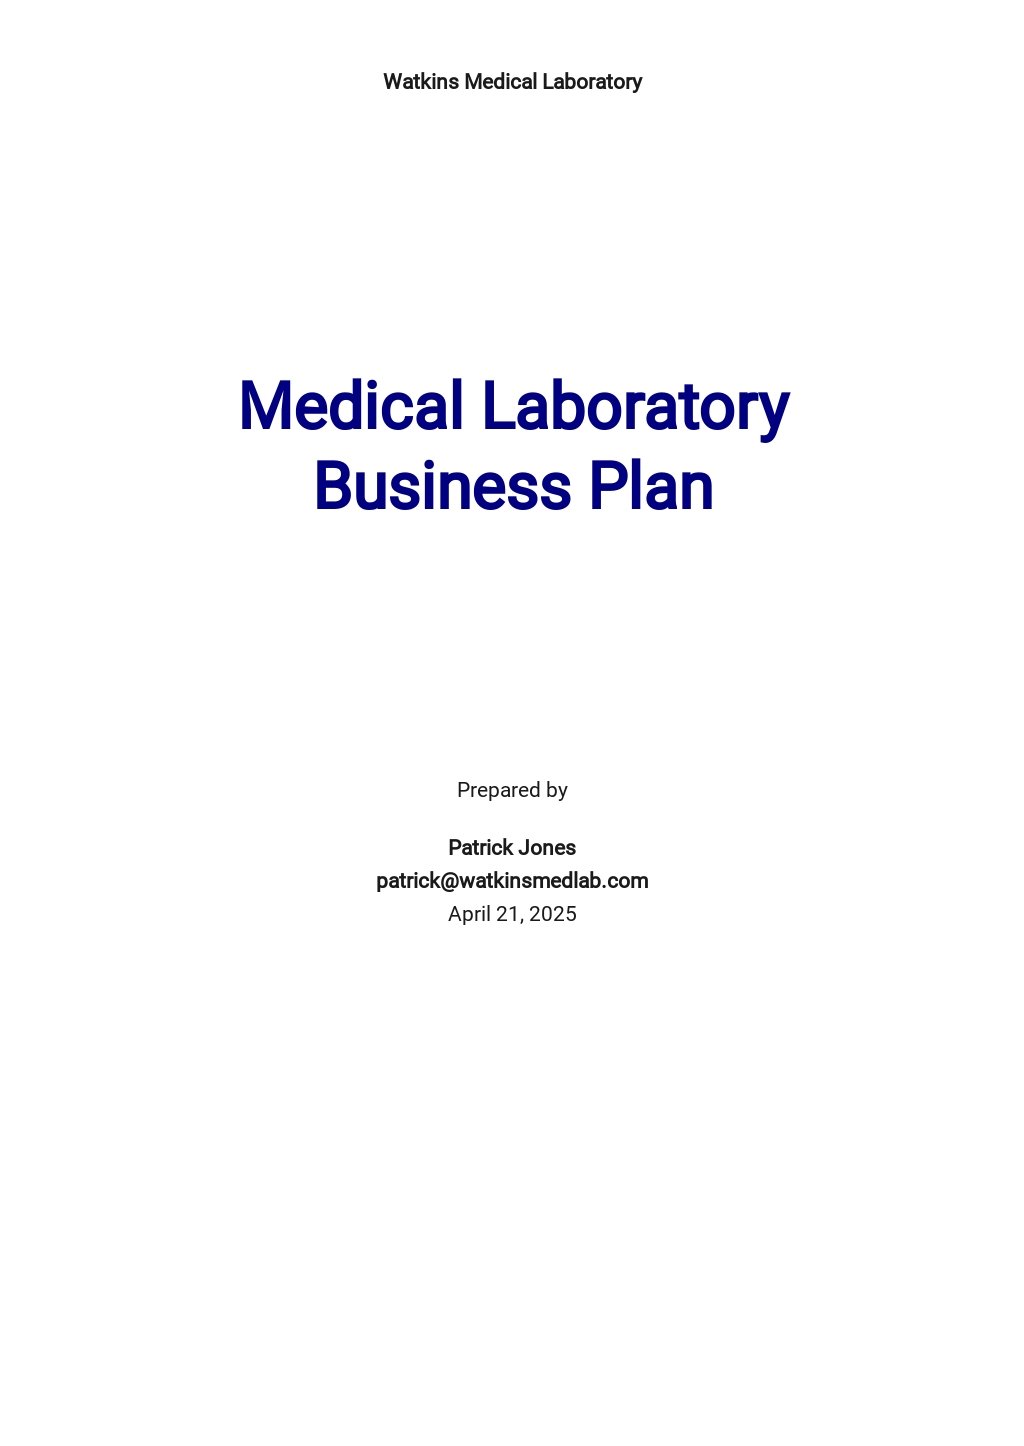 business plan of medical laboratory